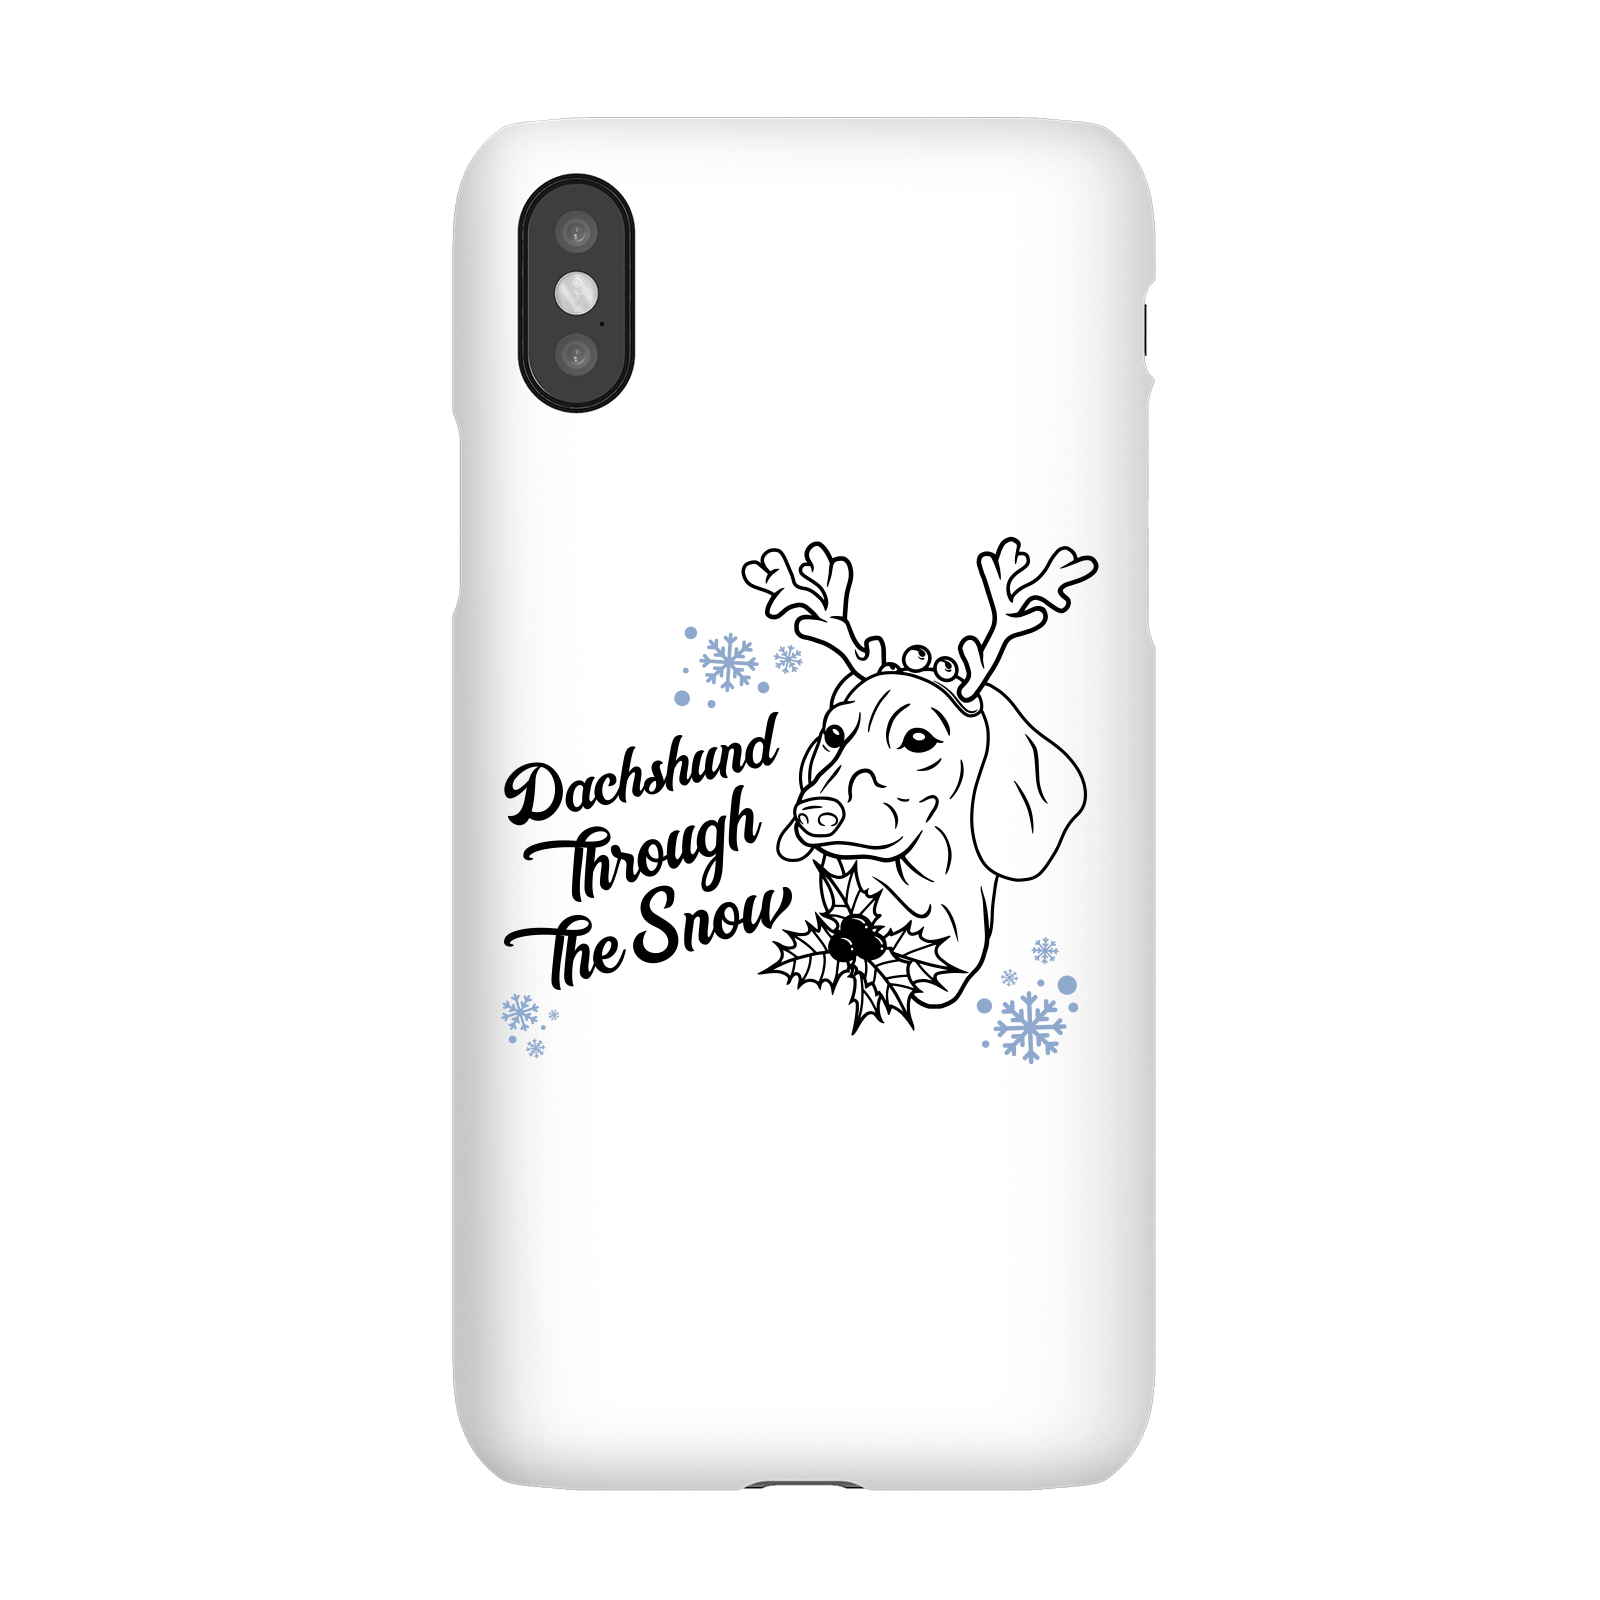 Dachshund Through The Snow Phone Case for iPhone and Android - iPhone 5/5s - Snap Case - Matte